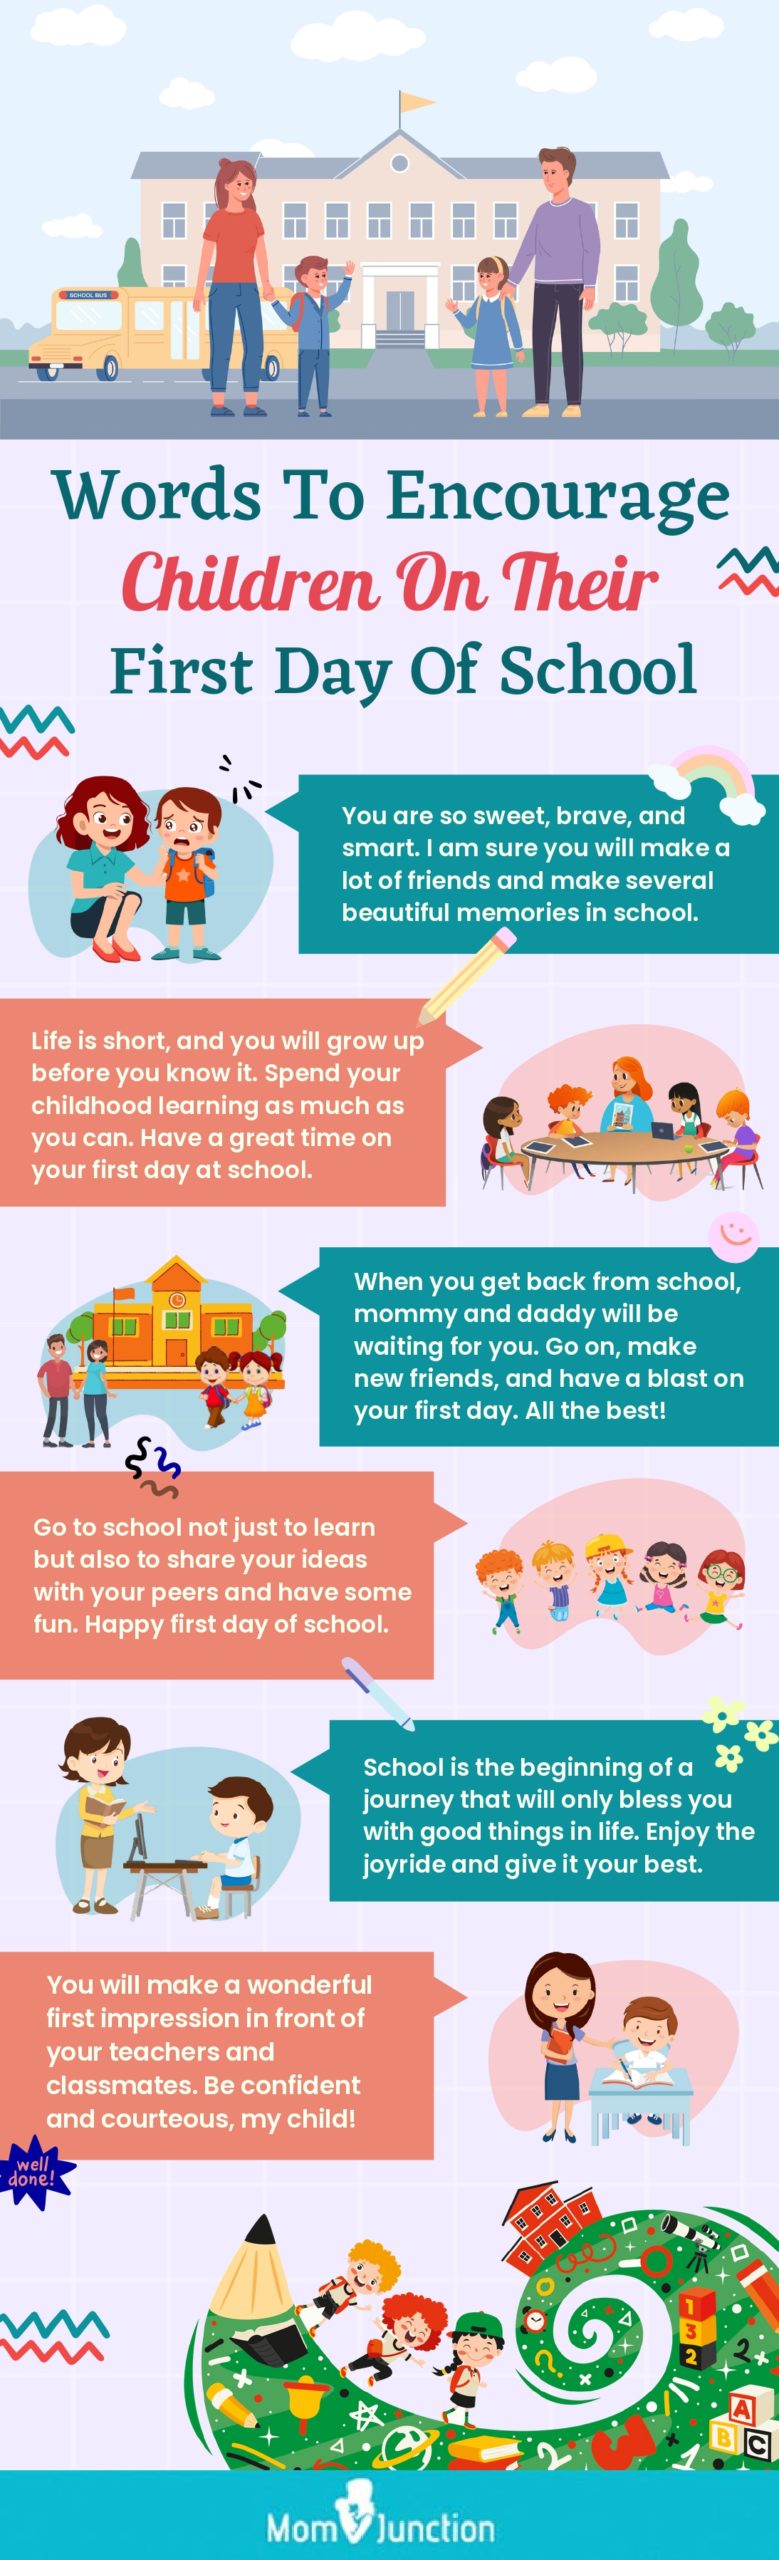 100+ Inspirational & Happy Quotes About First Day Of School